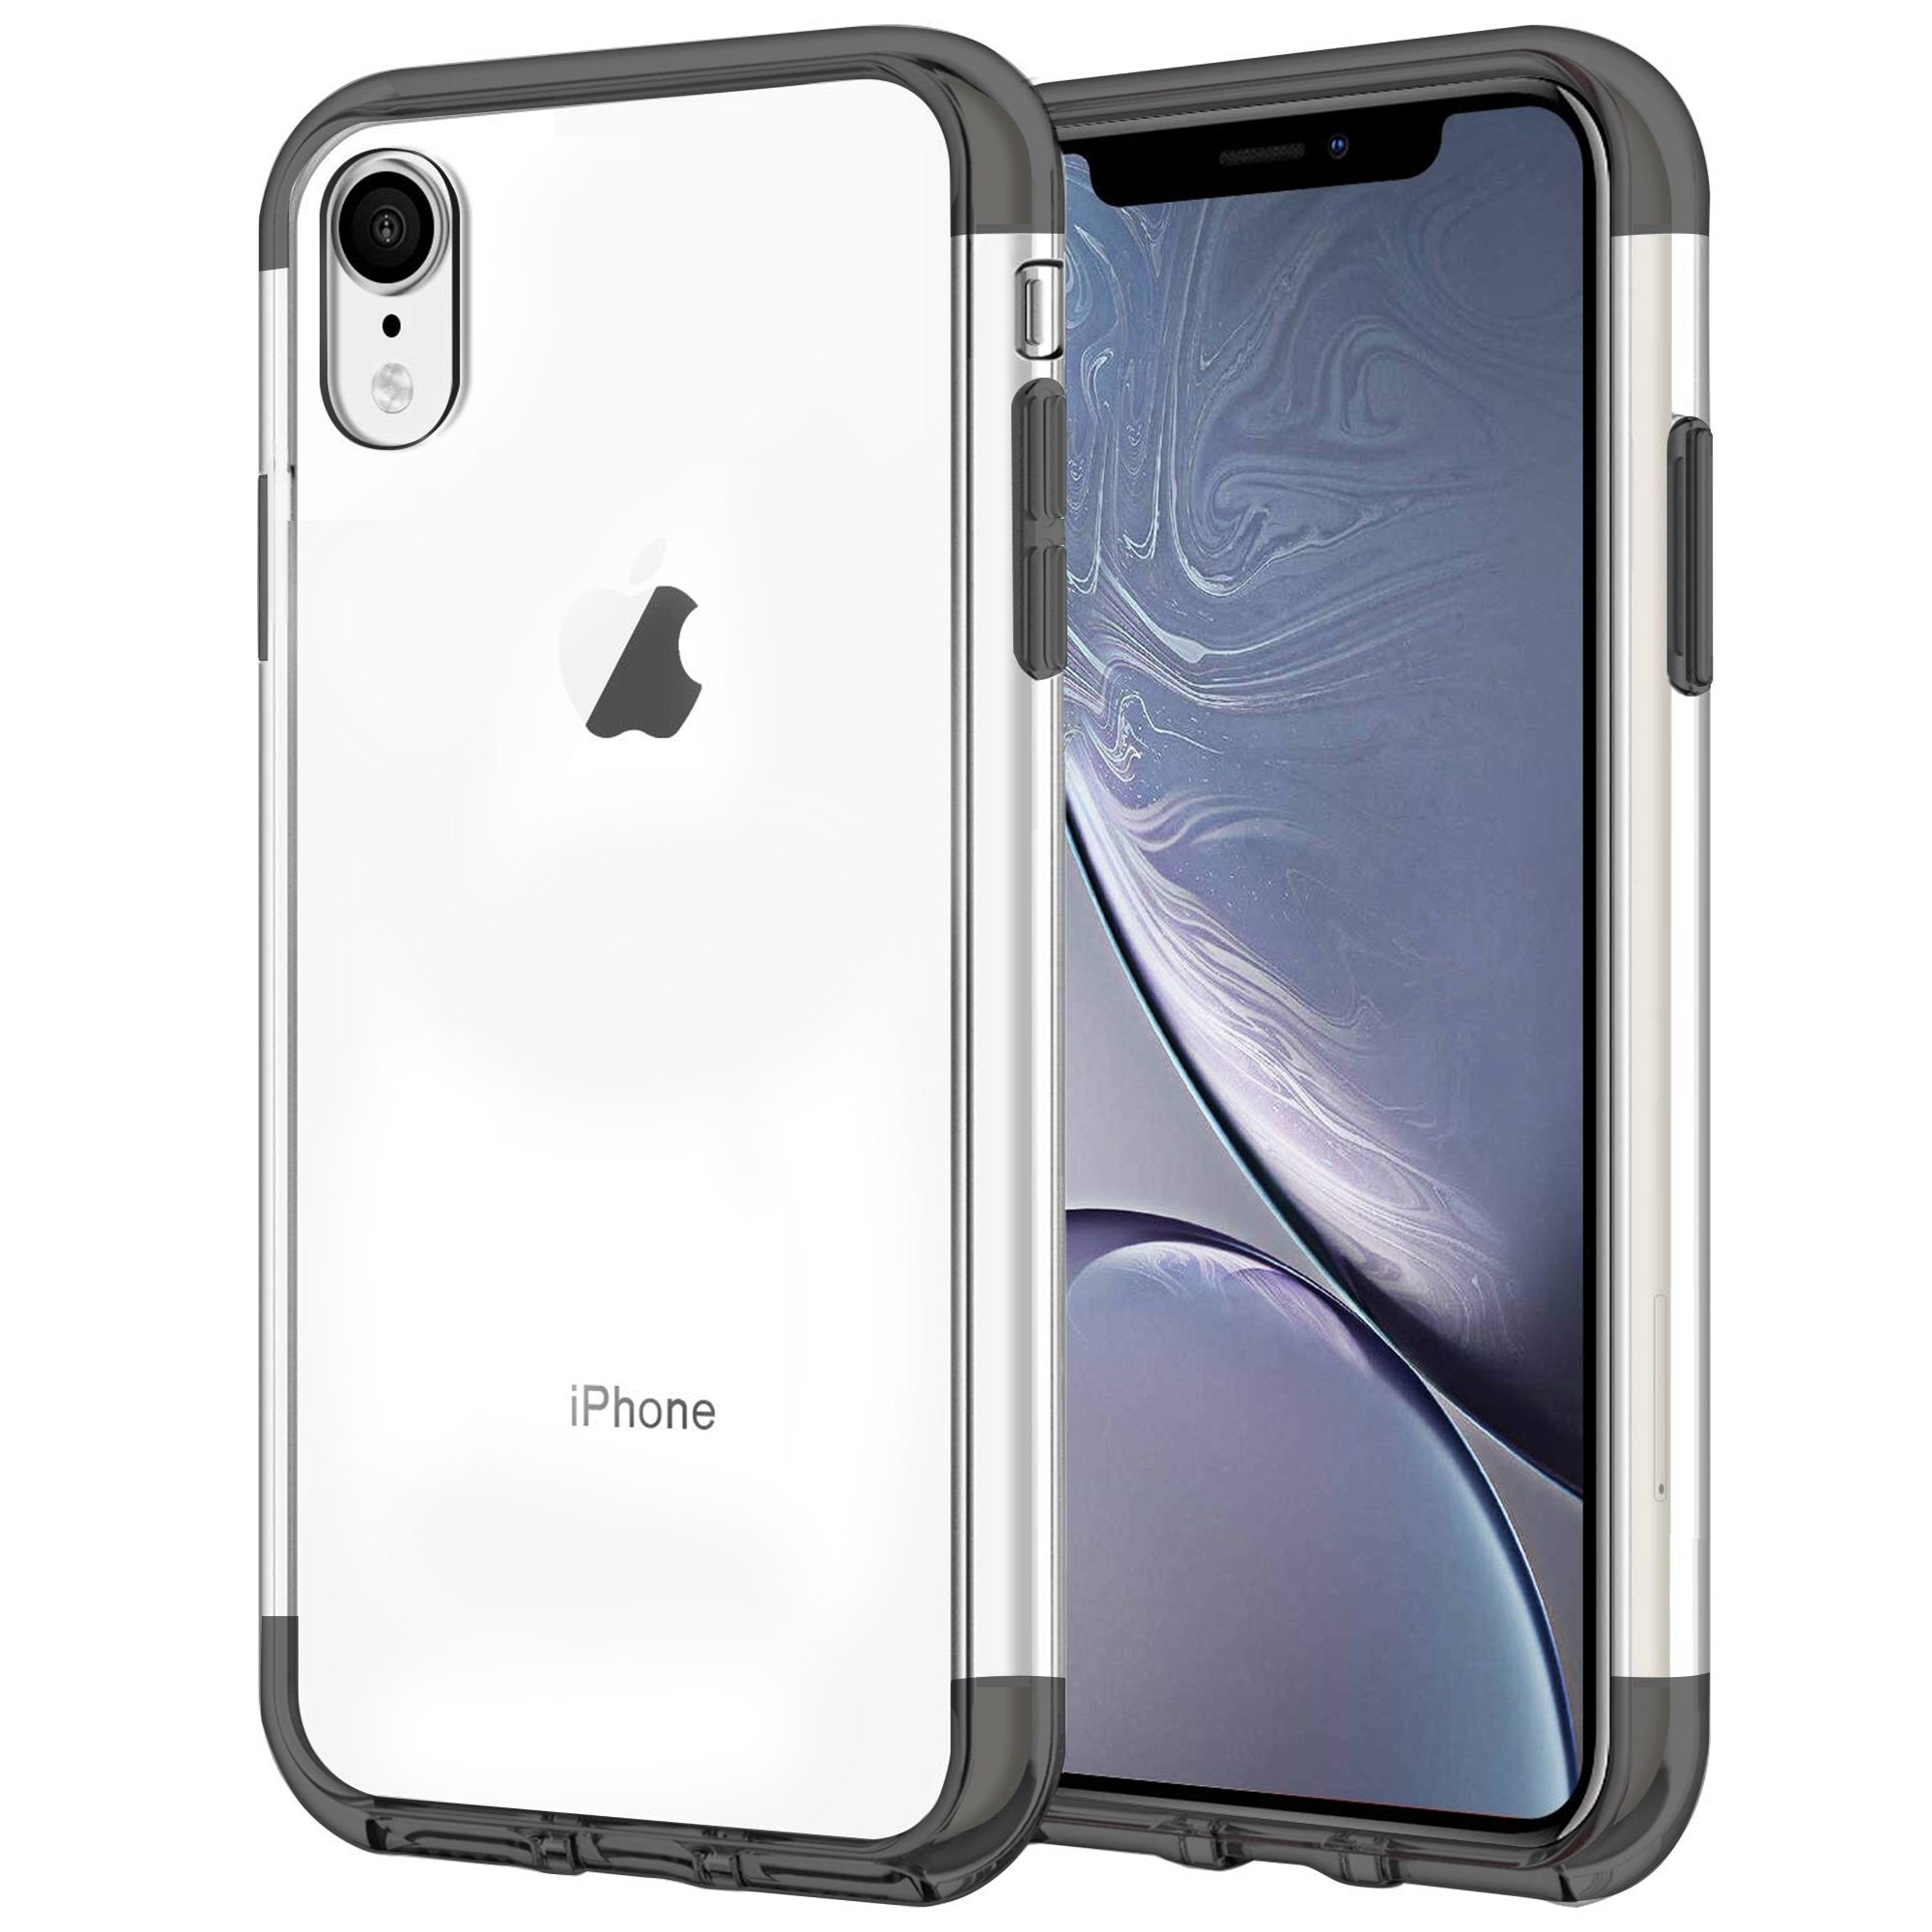 Case for iPhone XR Shock Proof Soft TPU Silicone Phone Clear Slim Cover